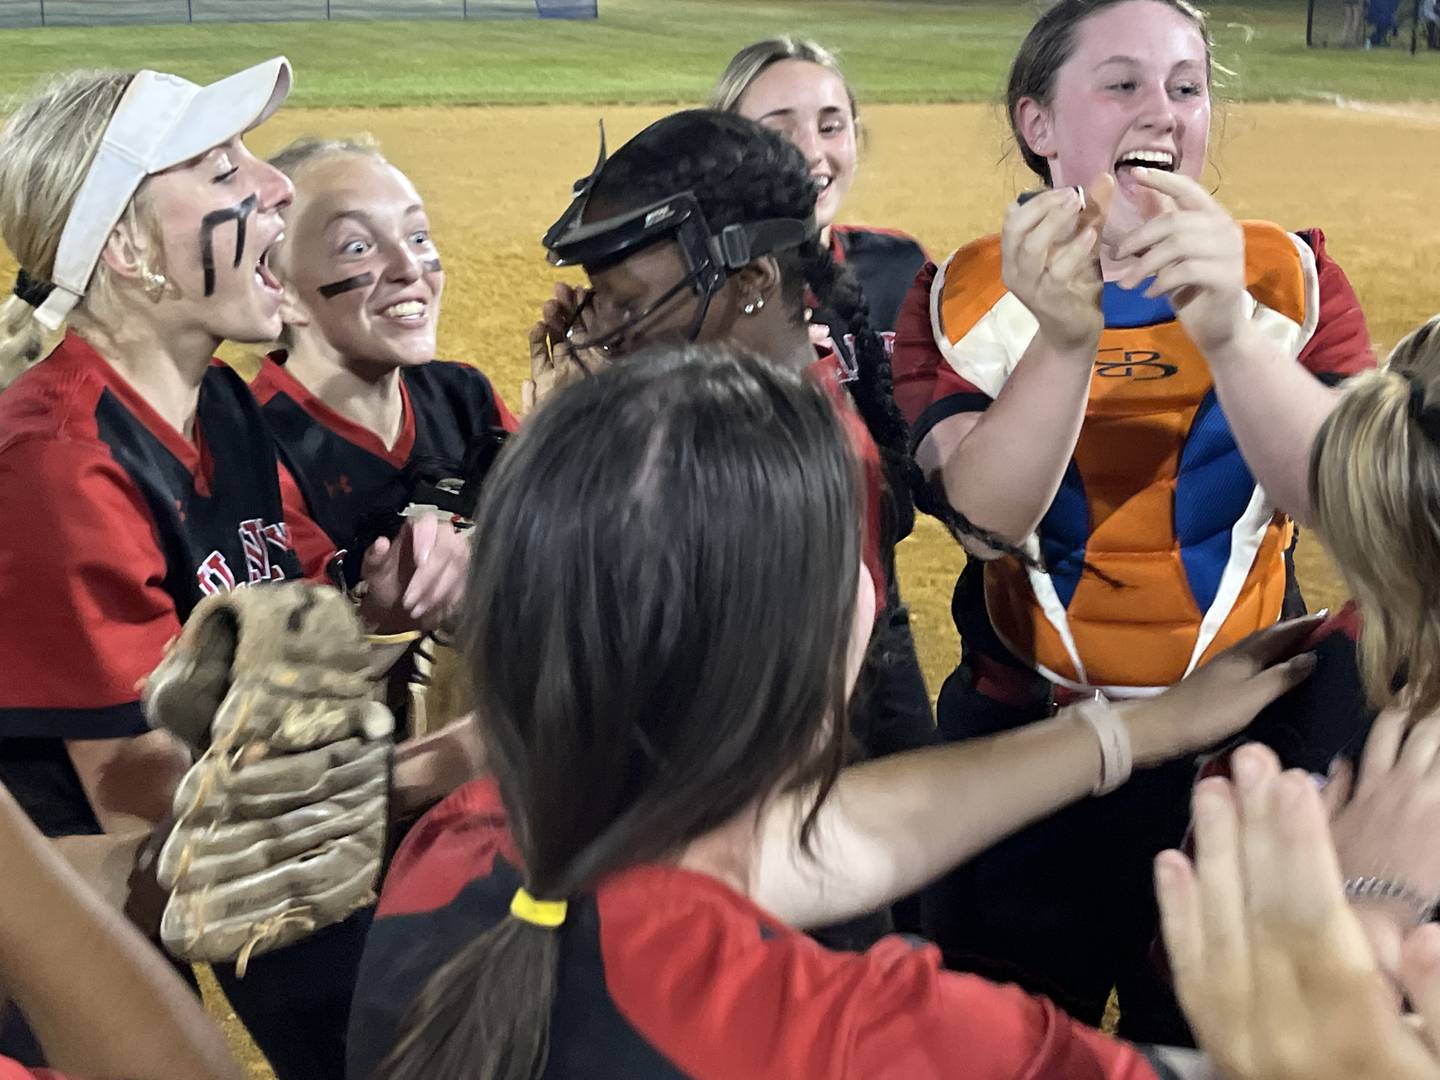 Dulaney's softball team celebrate after the final out of Tuesday's Class 4A state semifinal. The Lions secure their first state final appearance since 2003 with a 7-2 victory over No. 15 Broadneck at Bachmann Park in Glen Burnie.